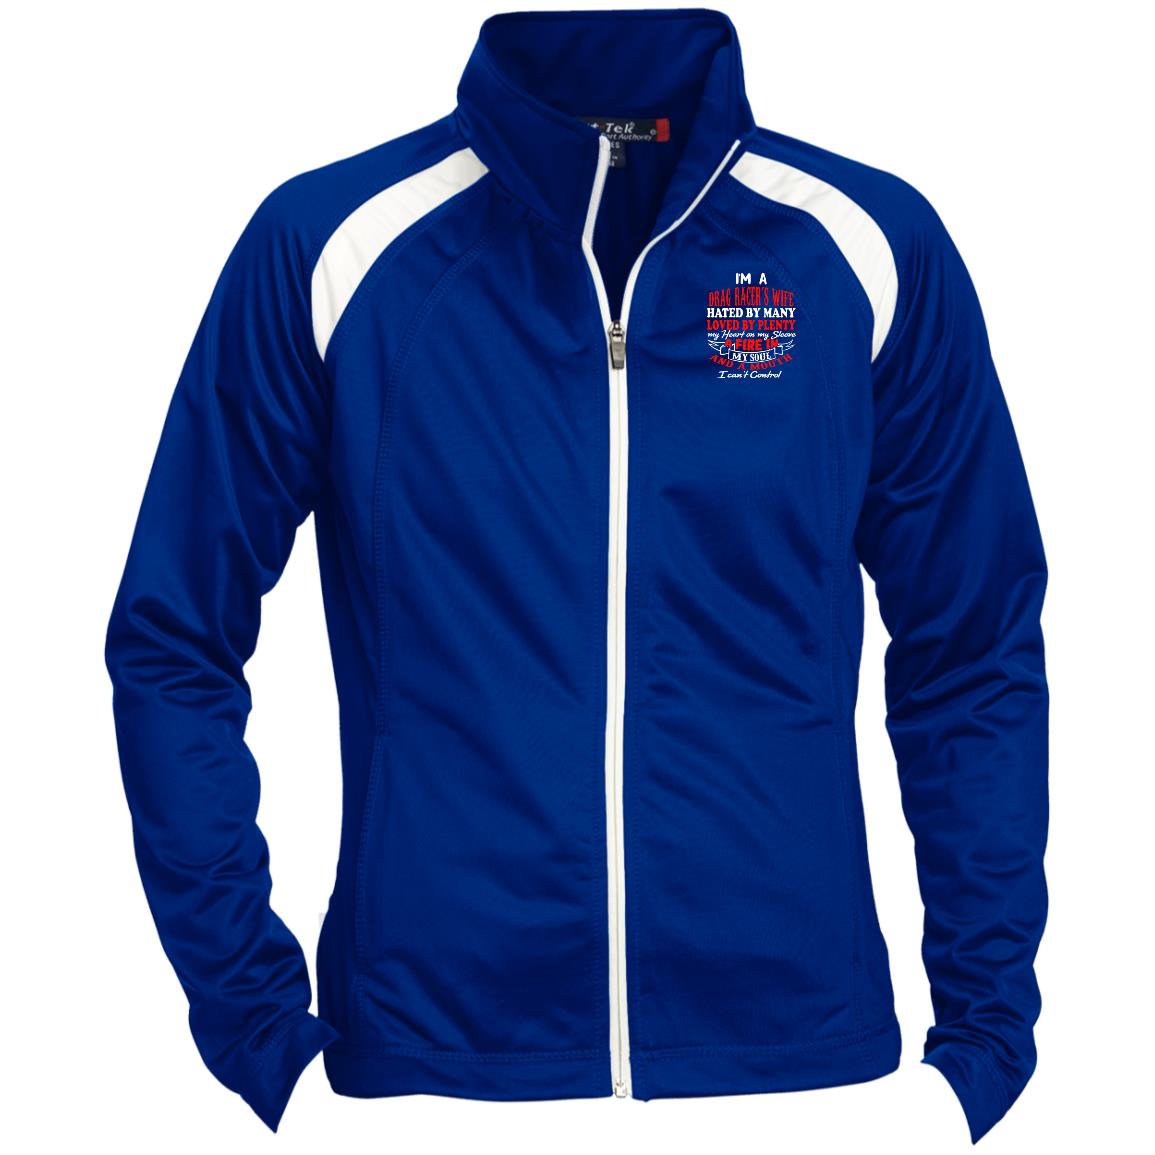 I'm A Drag Racer's Wife Hated By Many Loved By Plenty Ladies' Raglan Sleeve Warmup Jacket